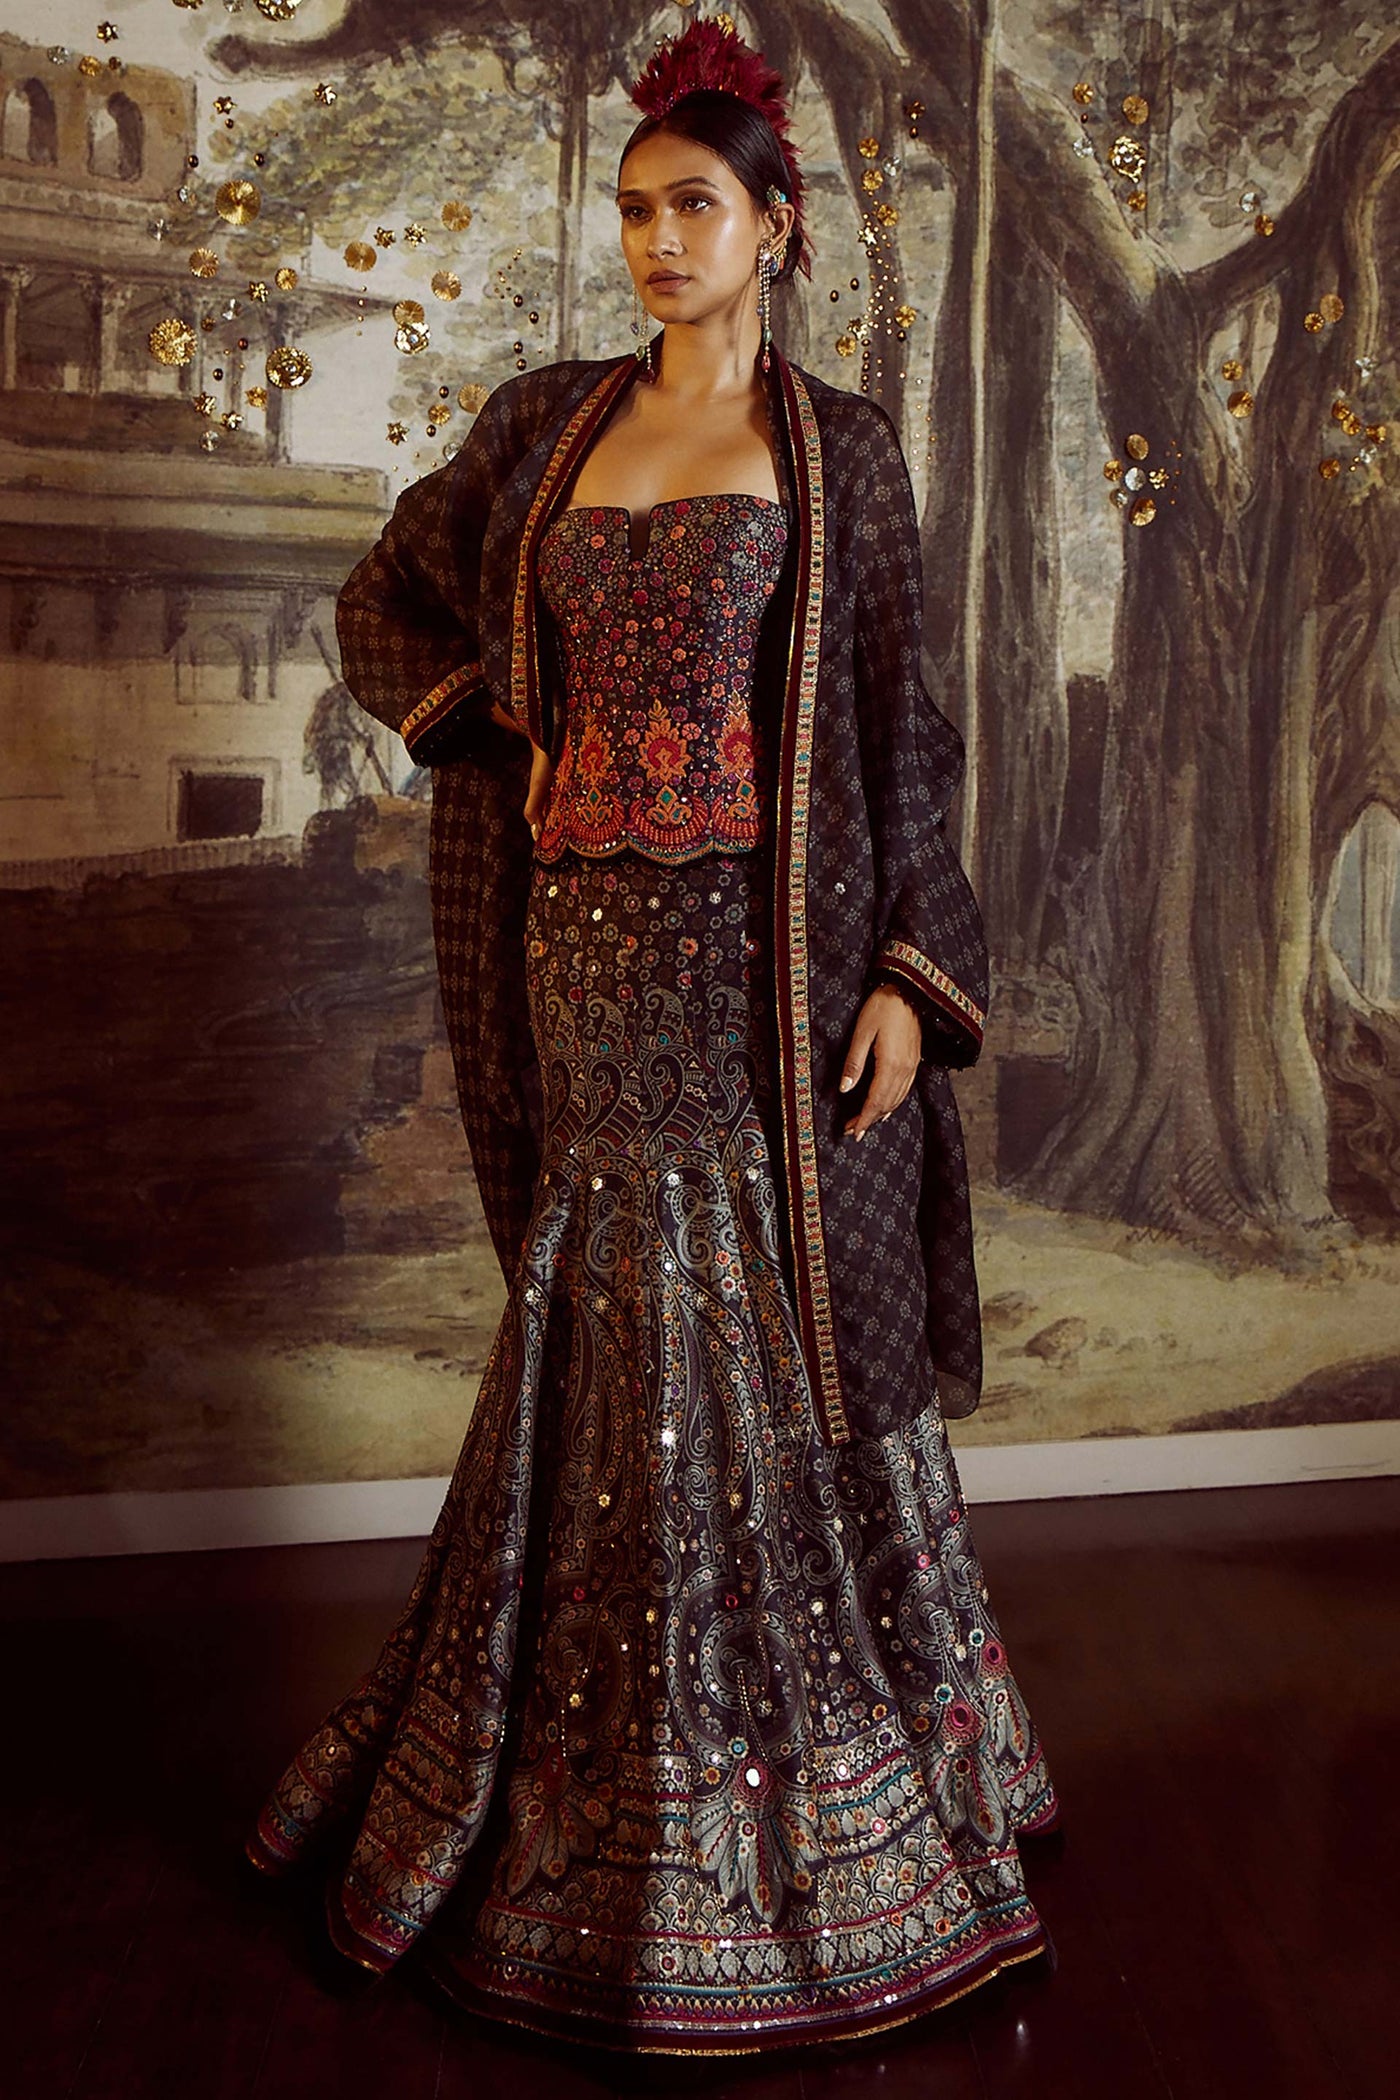 Tarun Tahiliani Panelled Printed Skirt With Aari Embroidery, Paired With Cape And Zardozi-Embroidered Corset Embellished With Fringes multicolor festive indian designer wear online shopping melange singapore 